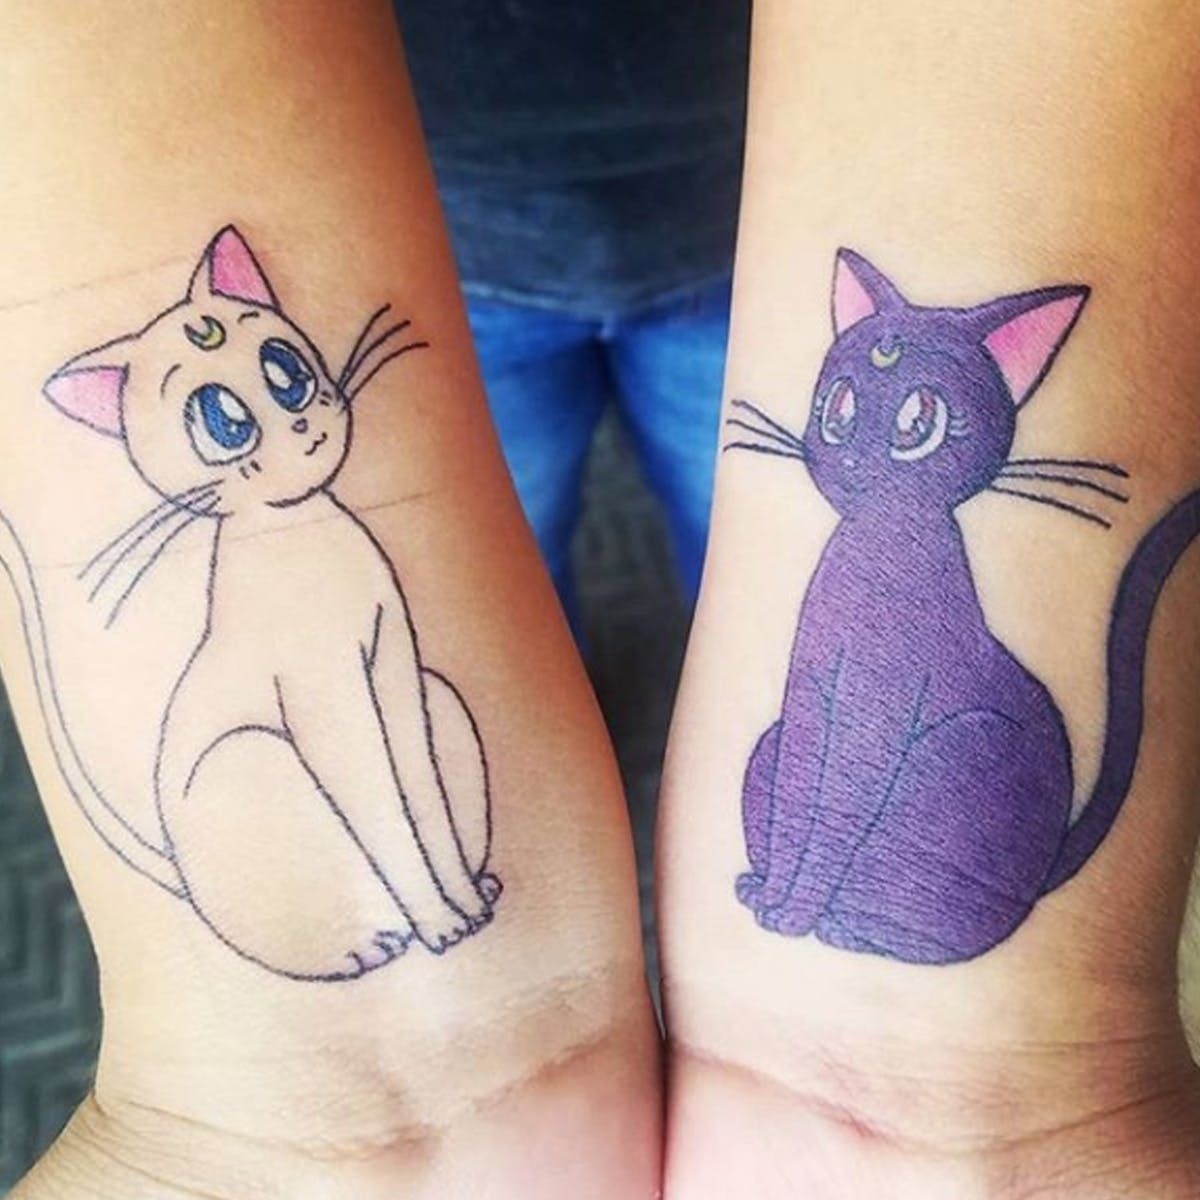 15 Friendship Tattoos That Aren’t Totally Cheesy